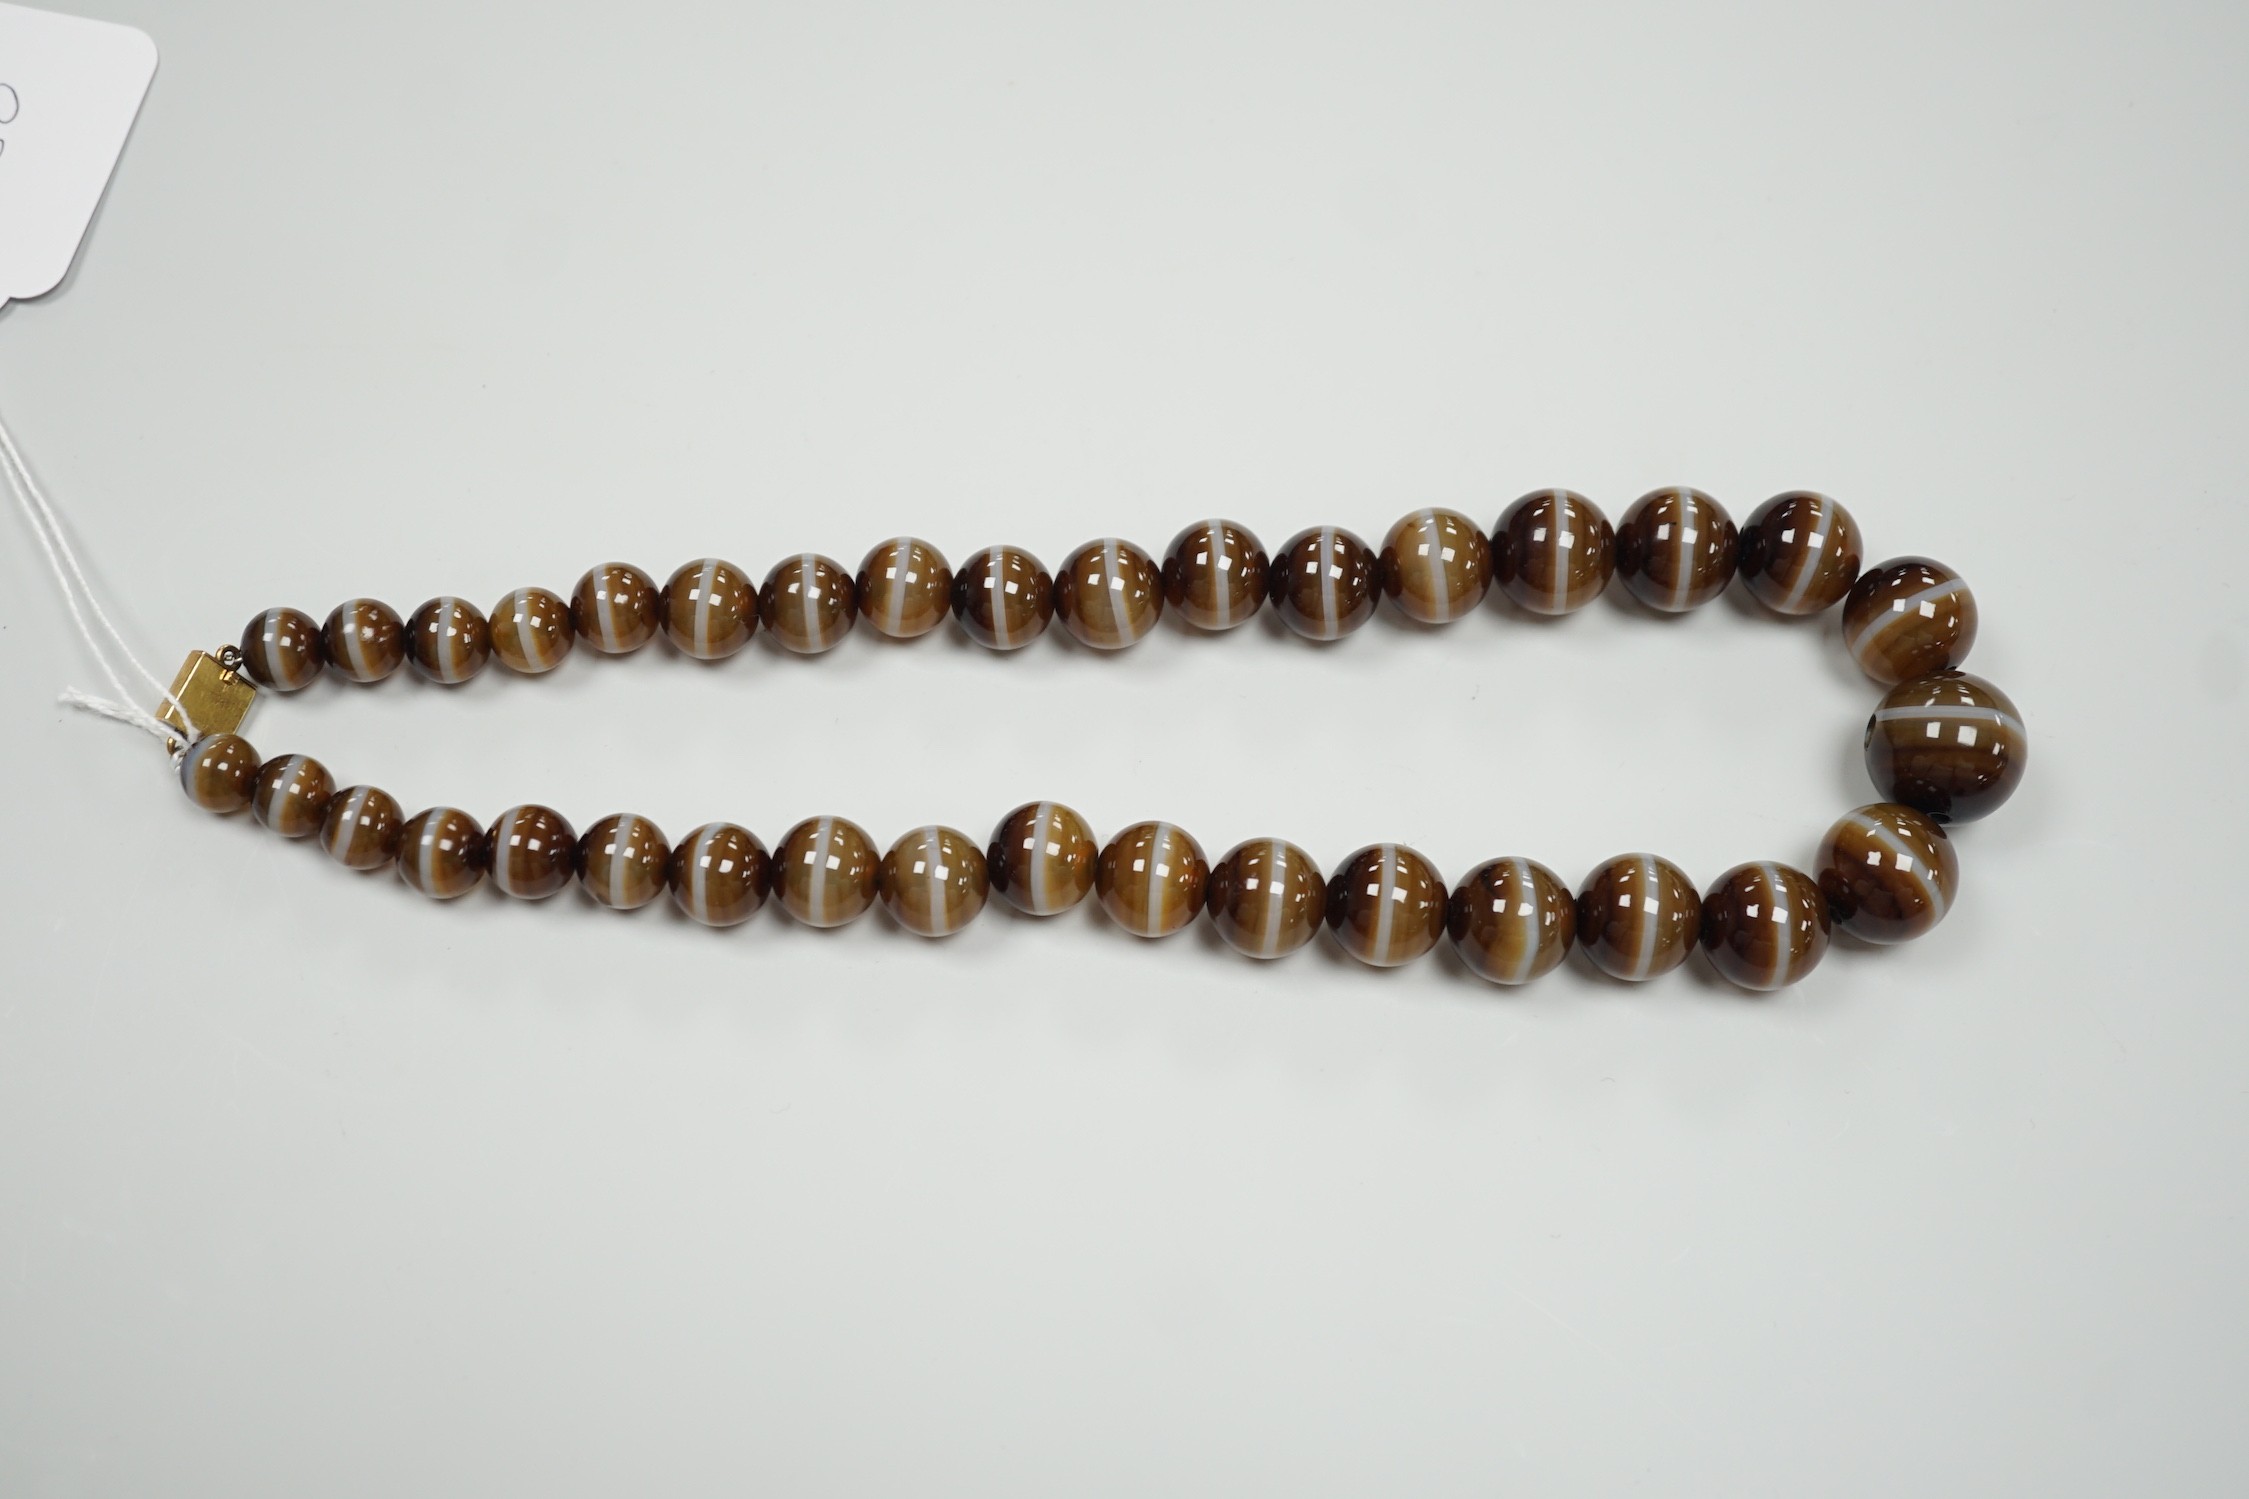 A single strand graduated banded agate circular bead necklace with yellow metal clasp, 46cm. - Image 4 of 7